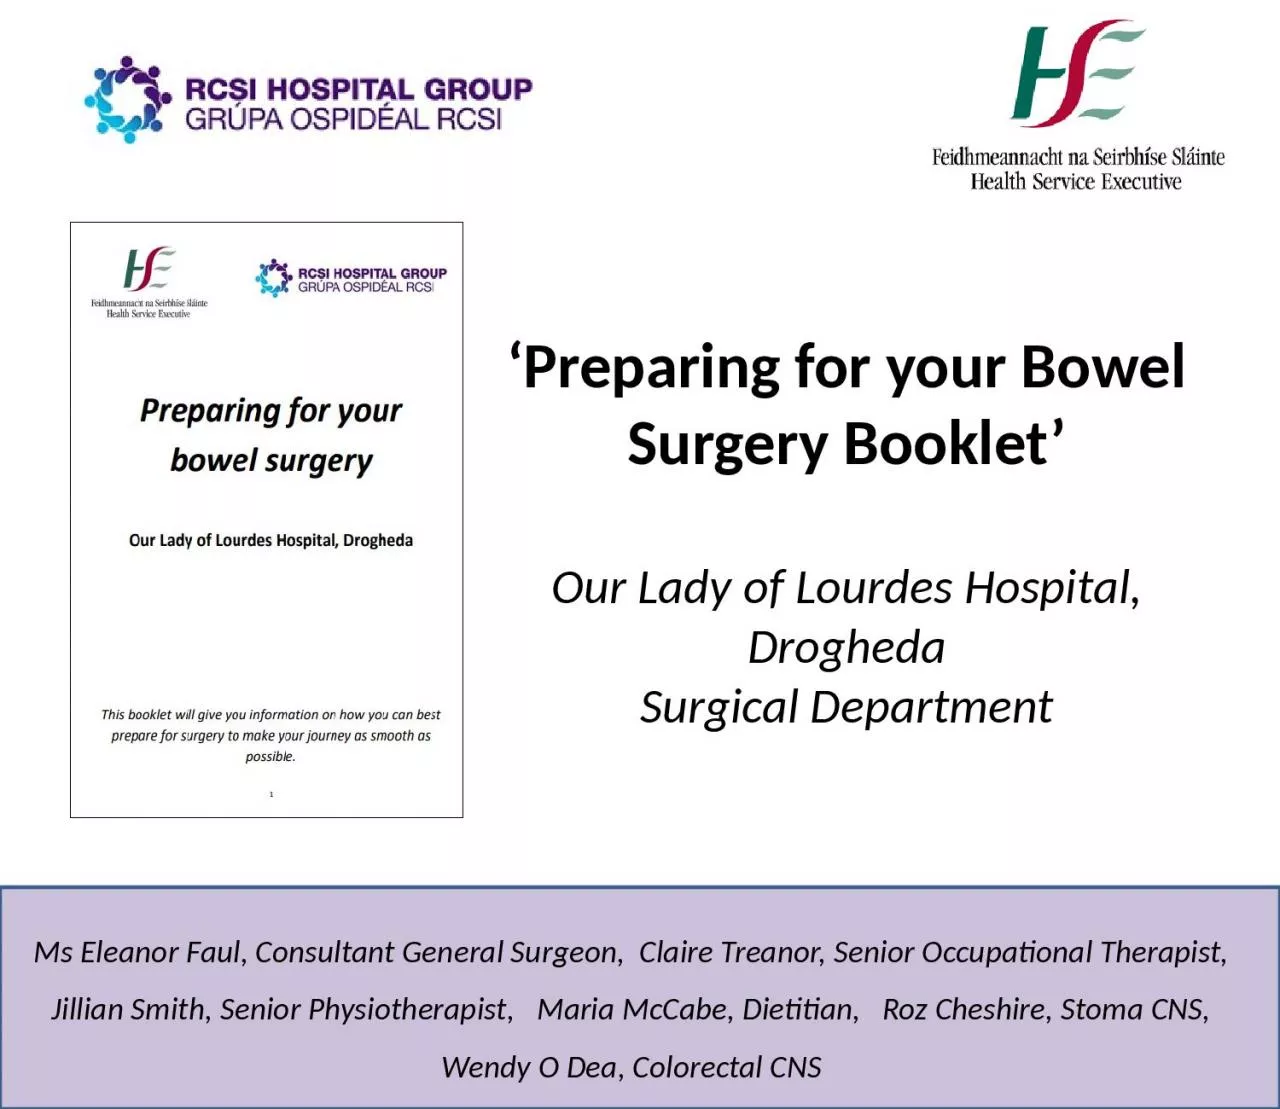 ‘Preparing for your Bowel Surgery Booklet’